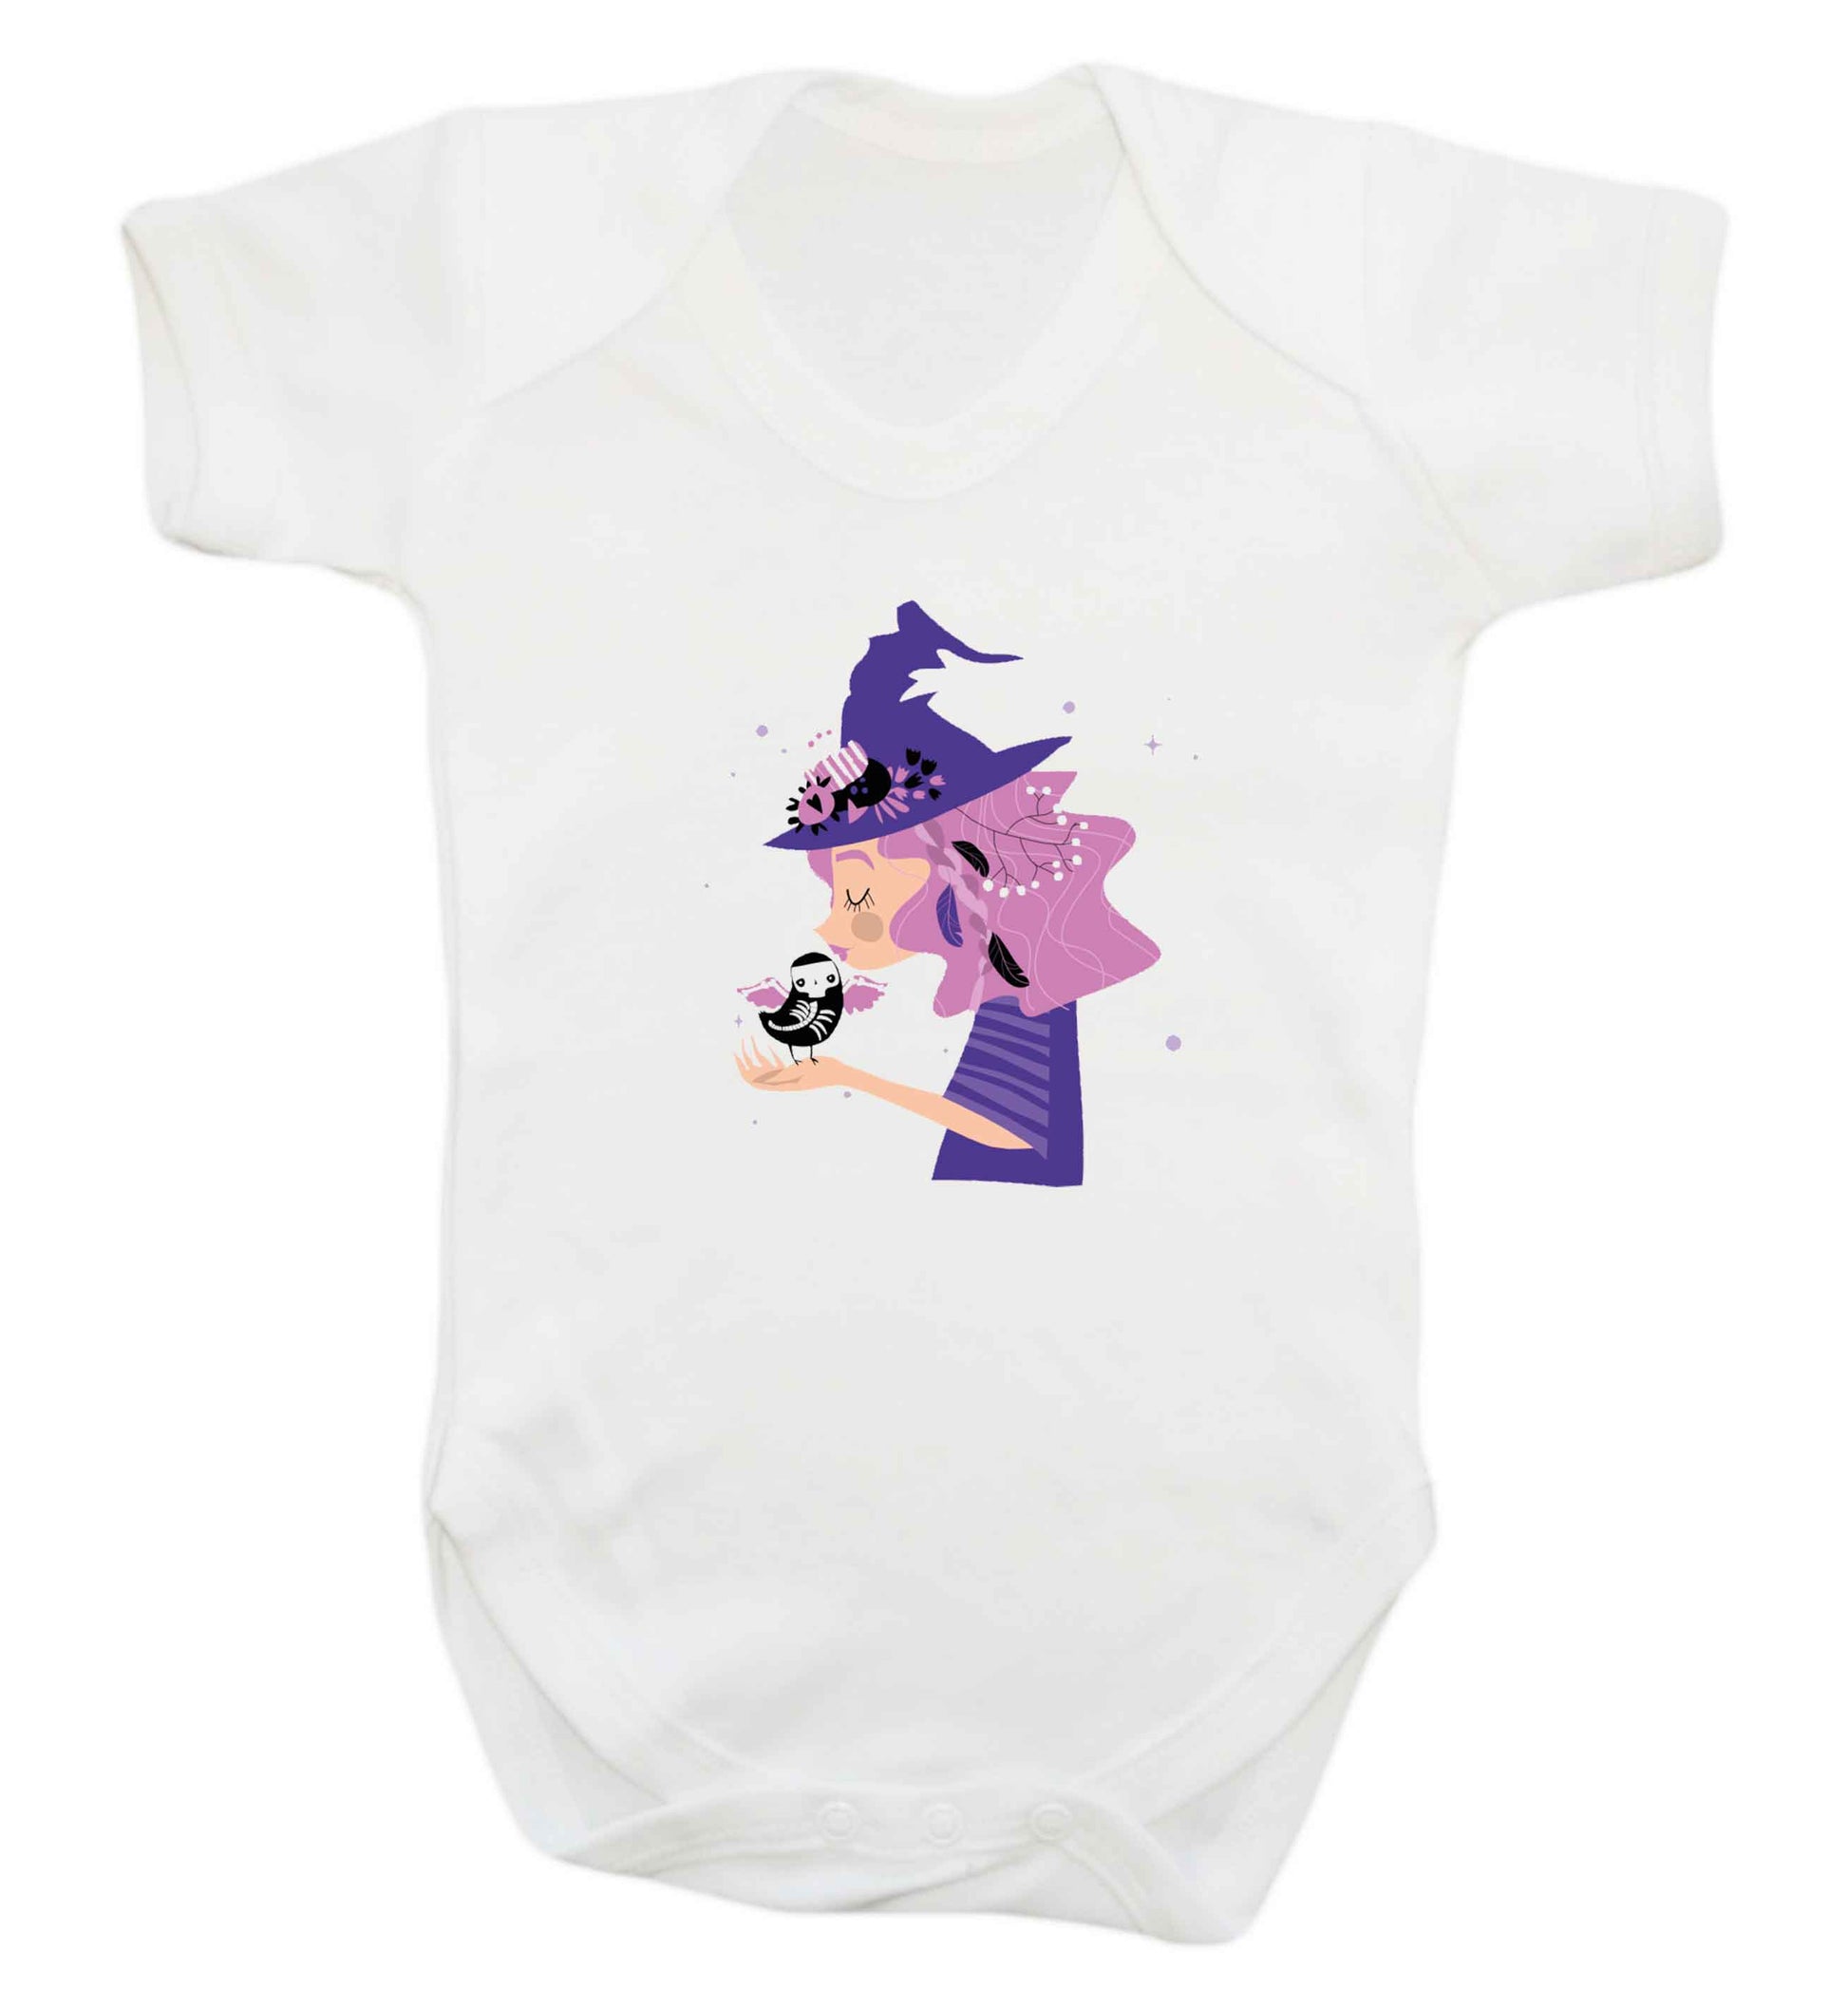 Witch illustration baby vest white 18-24 months